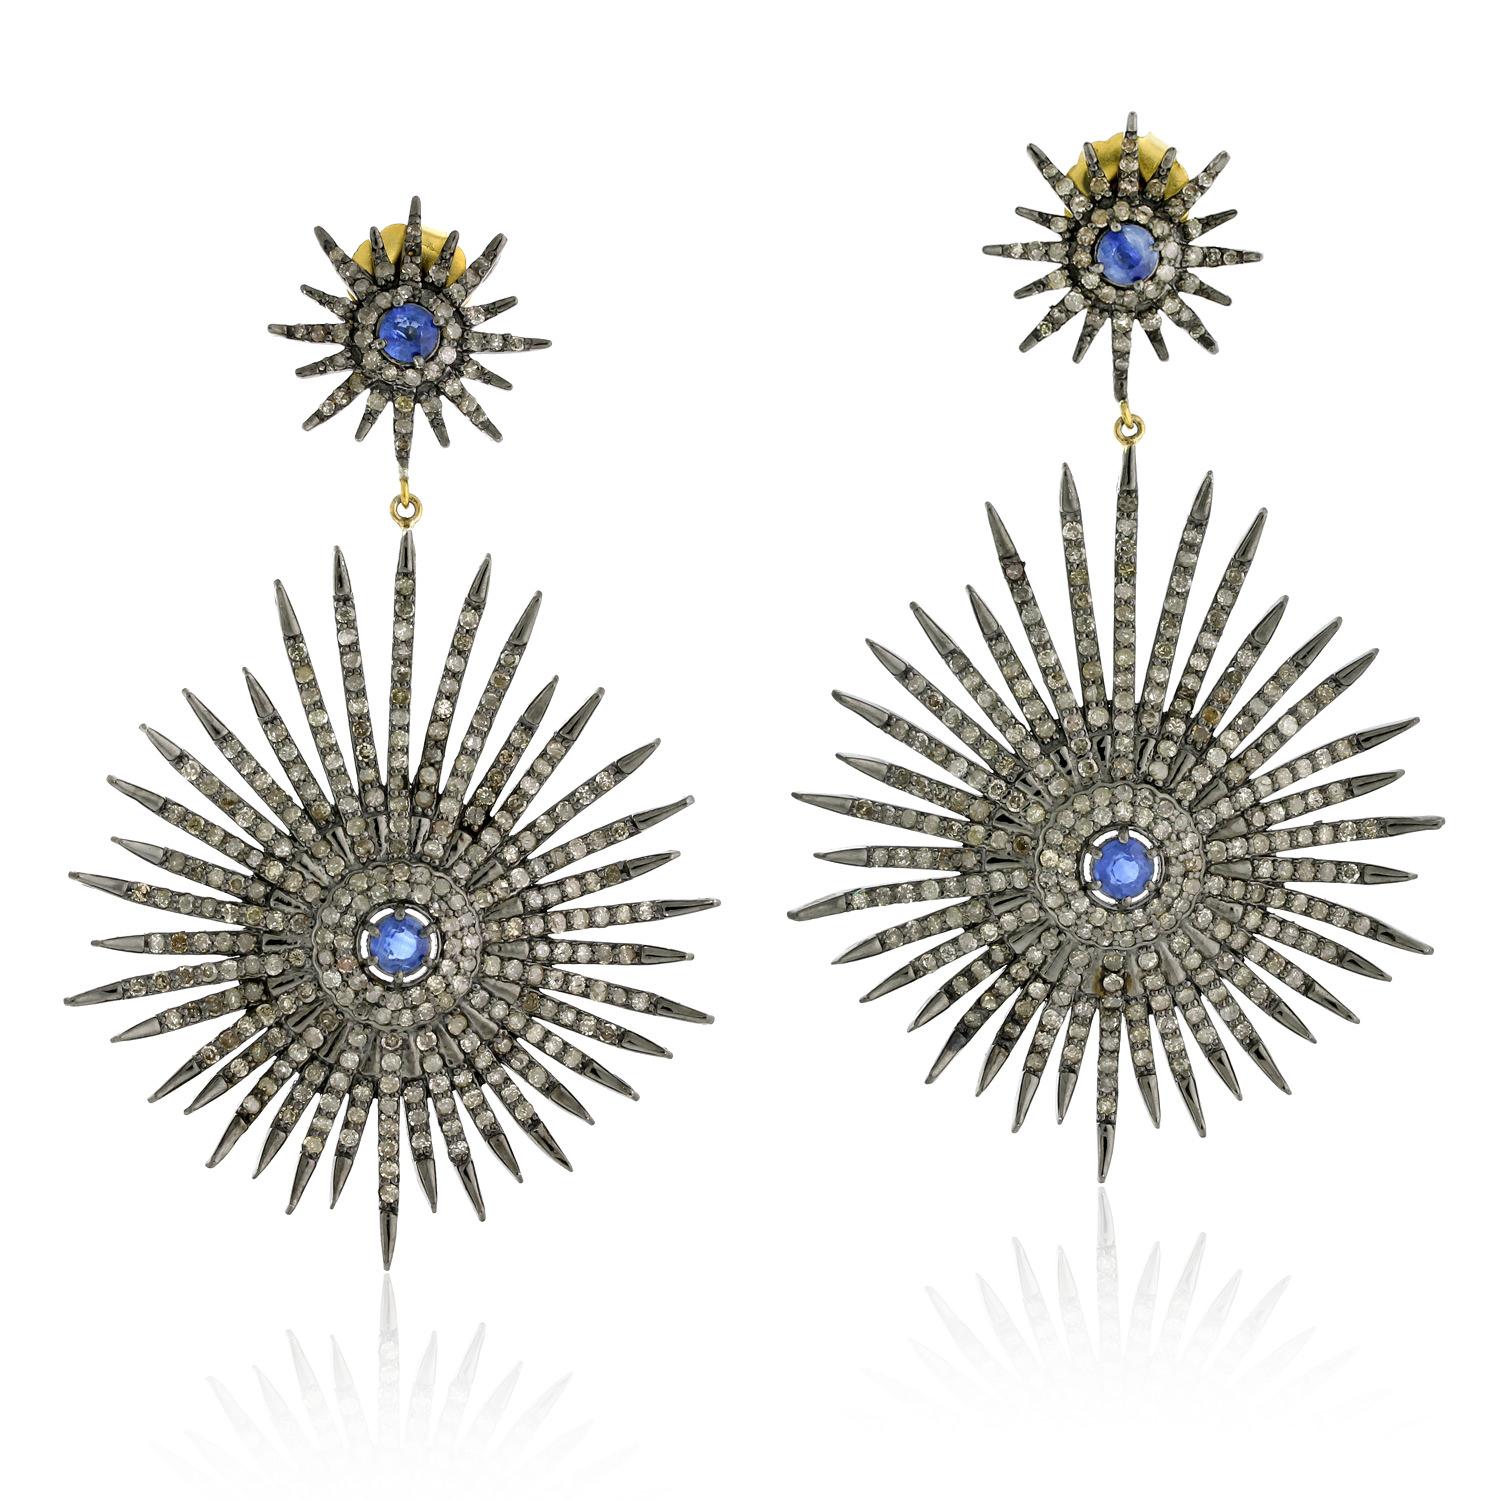 Mixed Cut Starburst Earrings with Kyanite & Pave Diamonds Made in 14k Gold & Silver For Sale